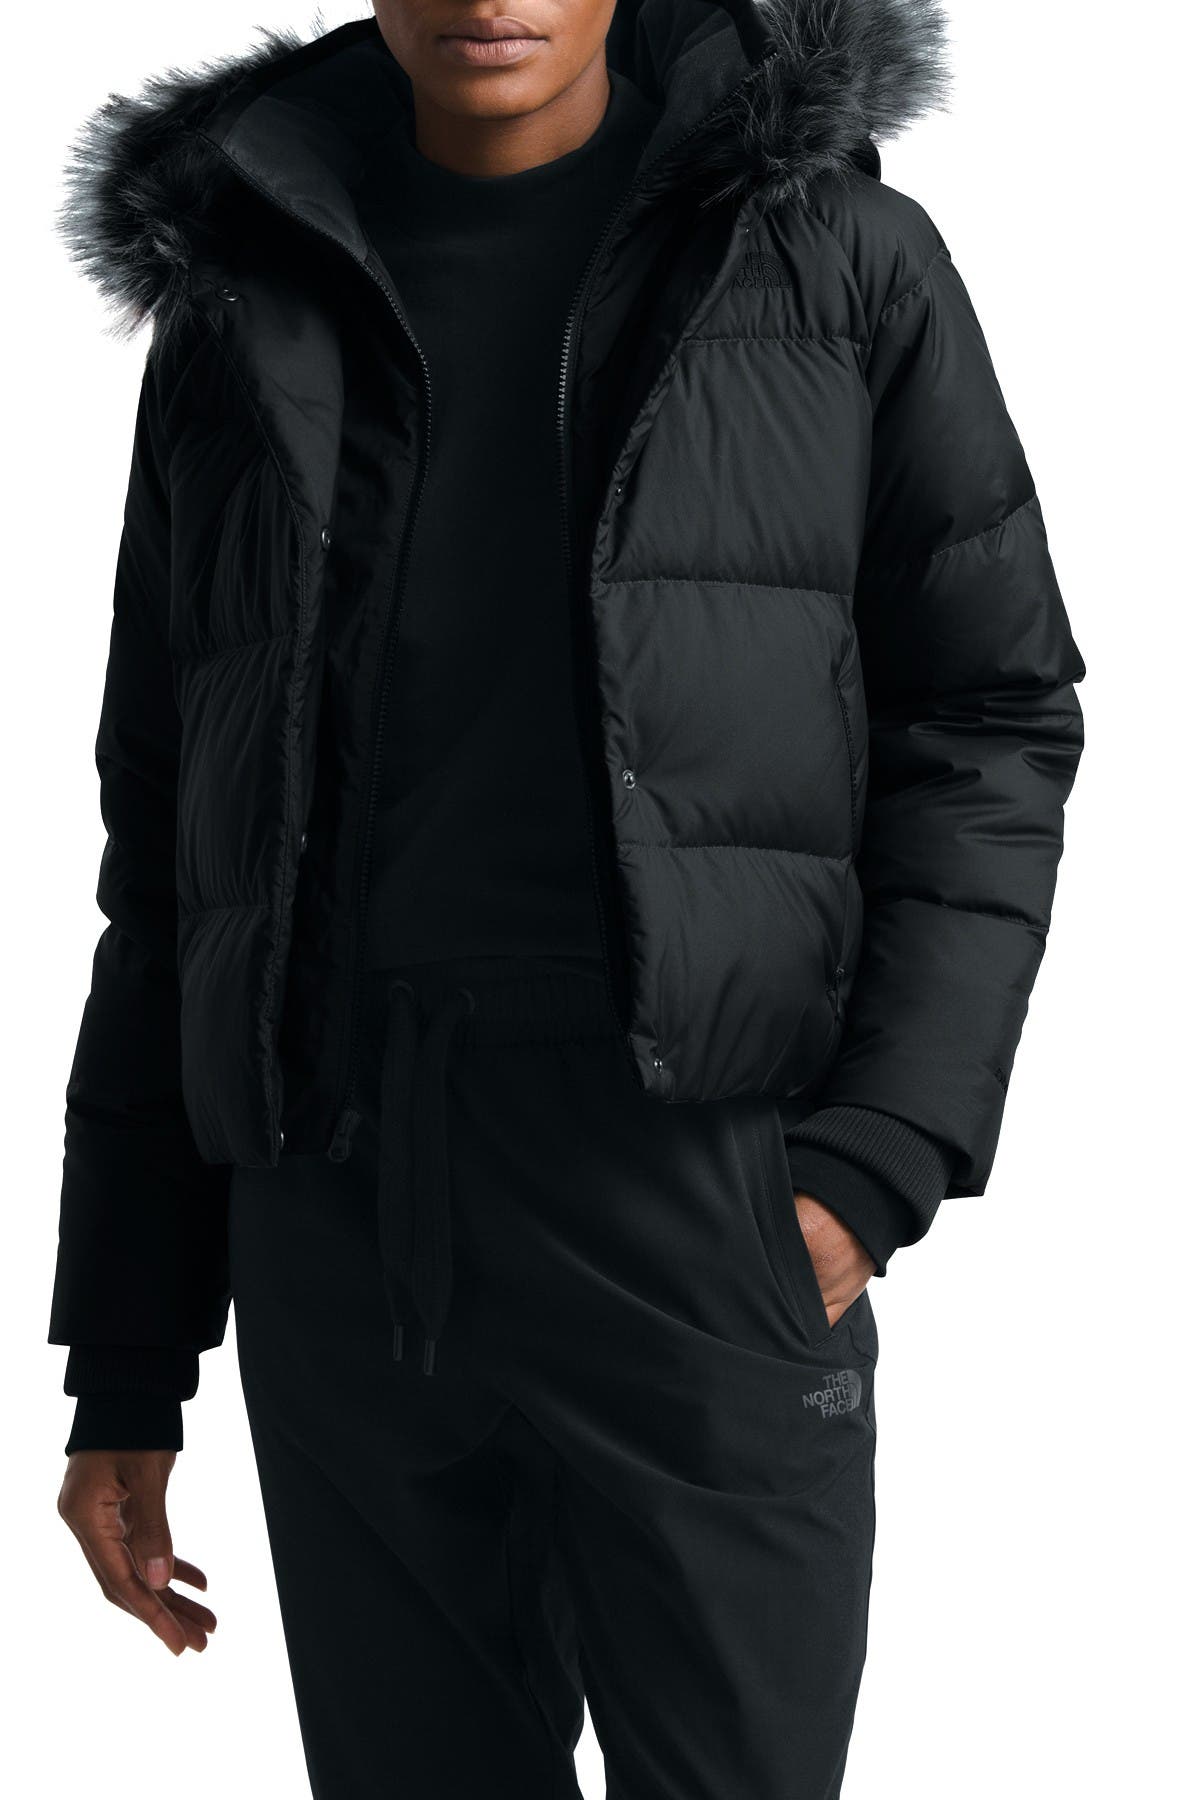 north face jacket with fur